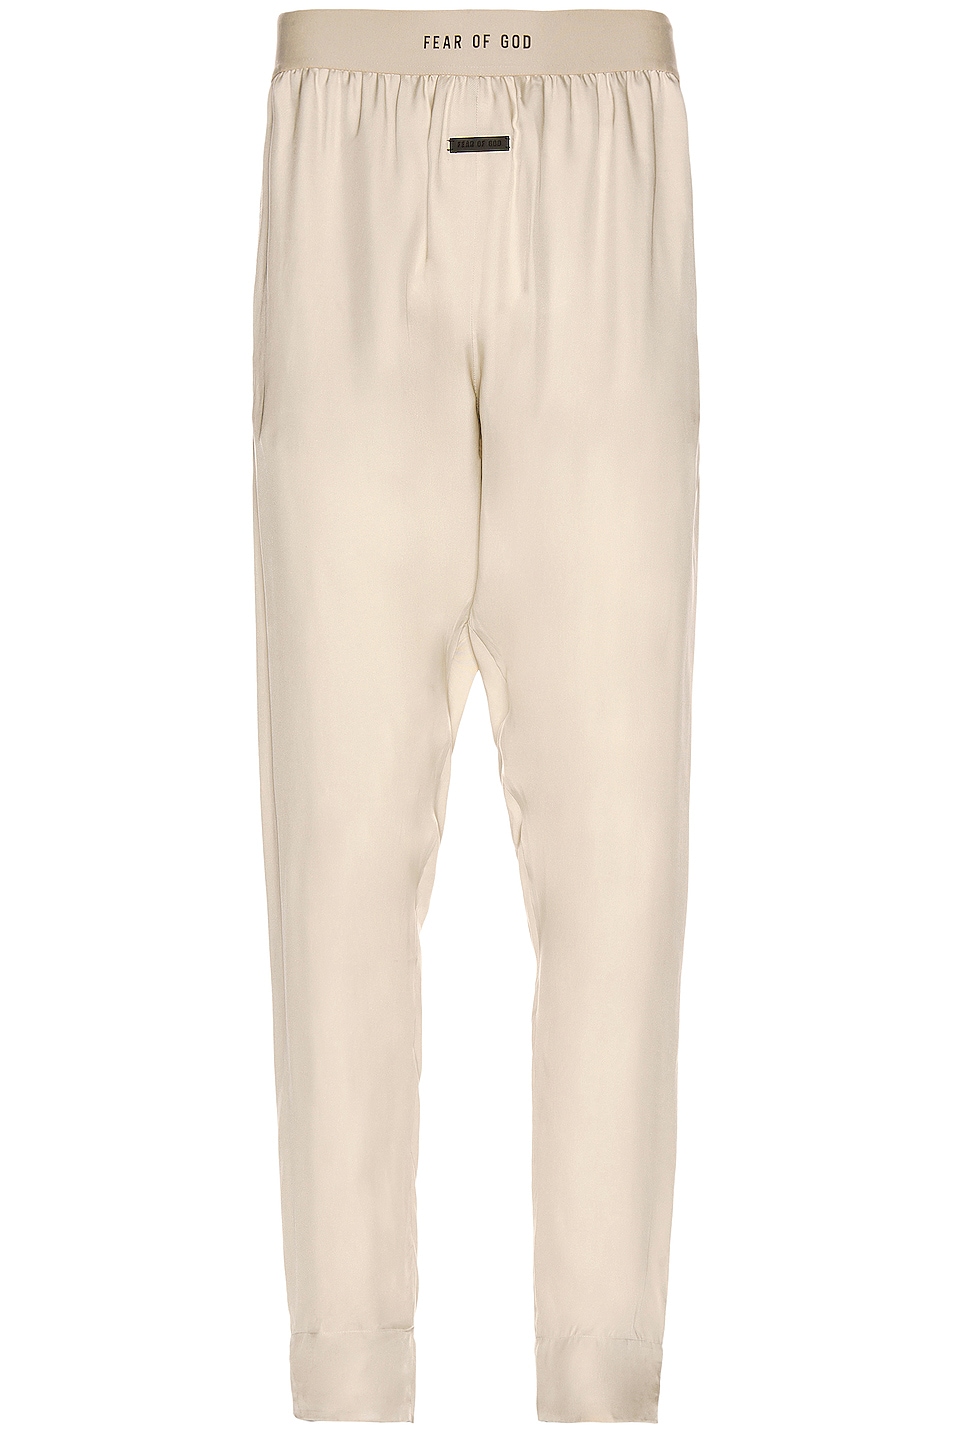 Image 1 of Fear of God Lounge Pant in Cement